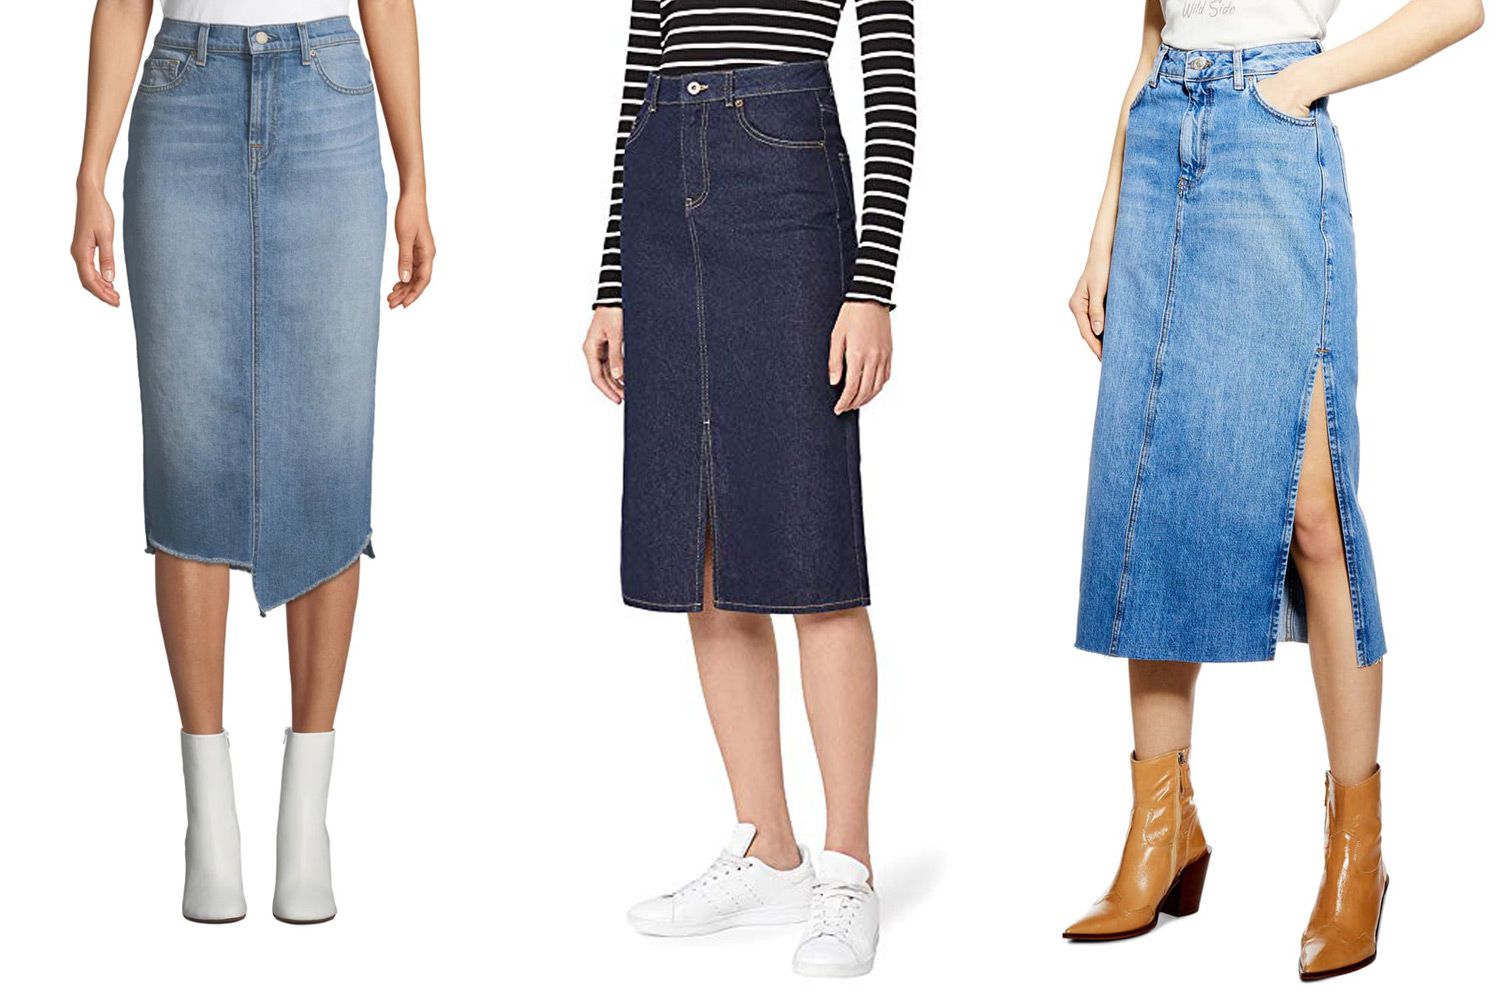 12 Best Denim Skirts for 2019, According to Celebrities | PEOPLE.com